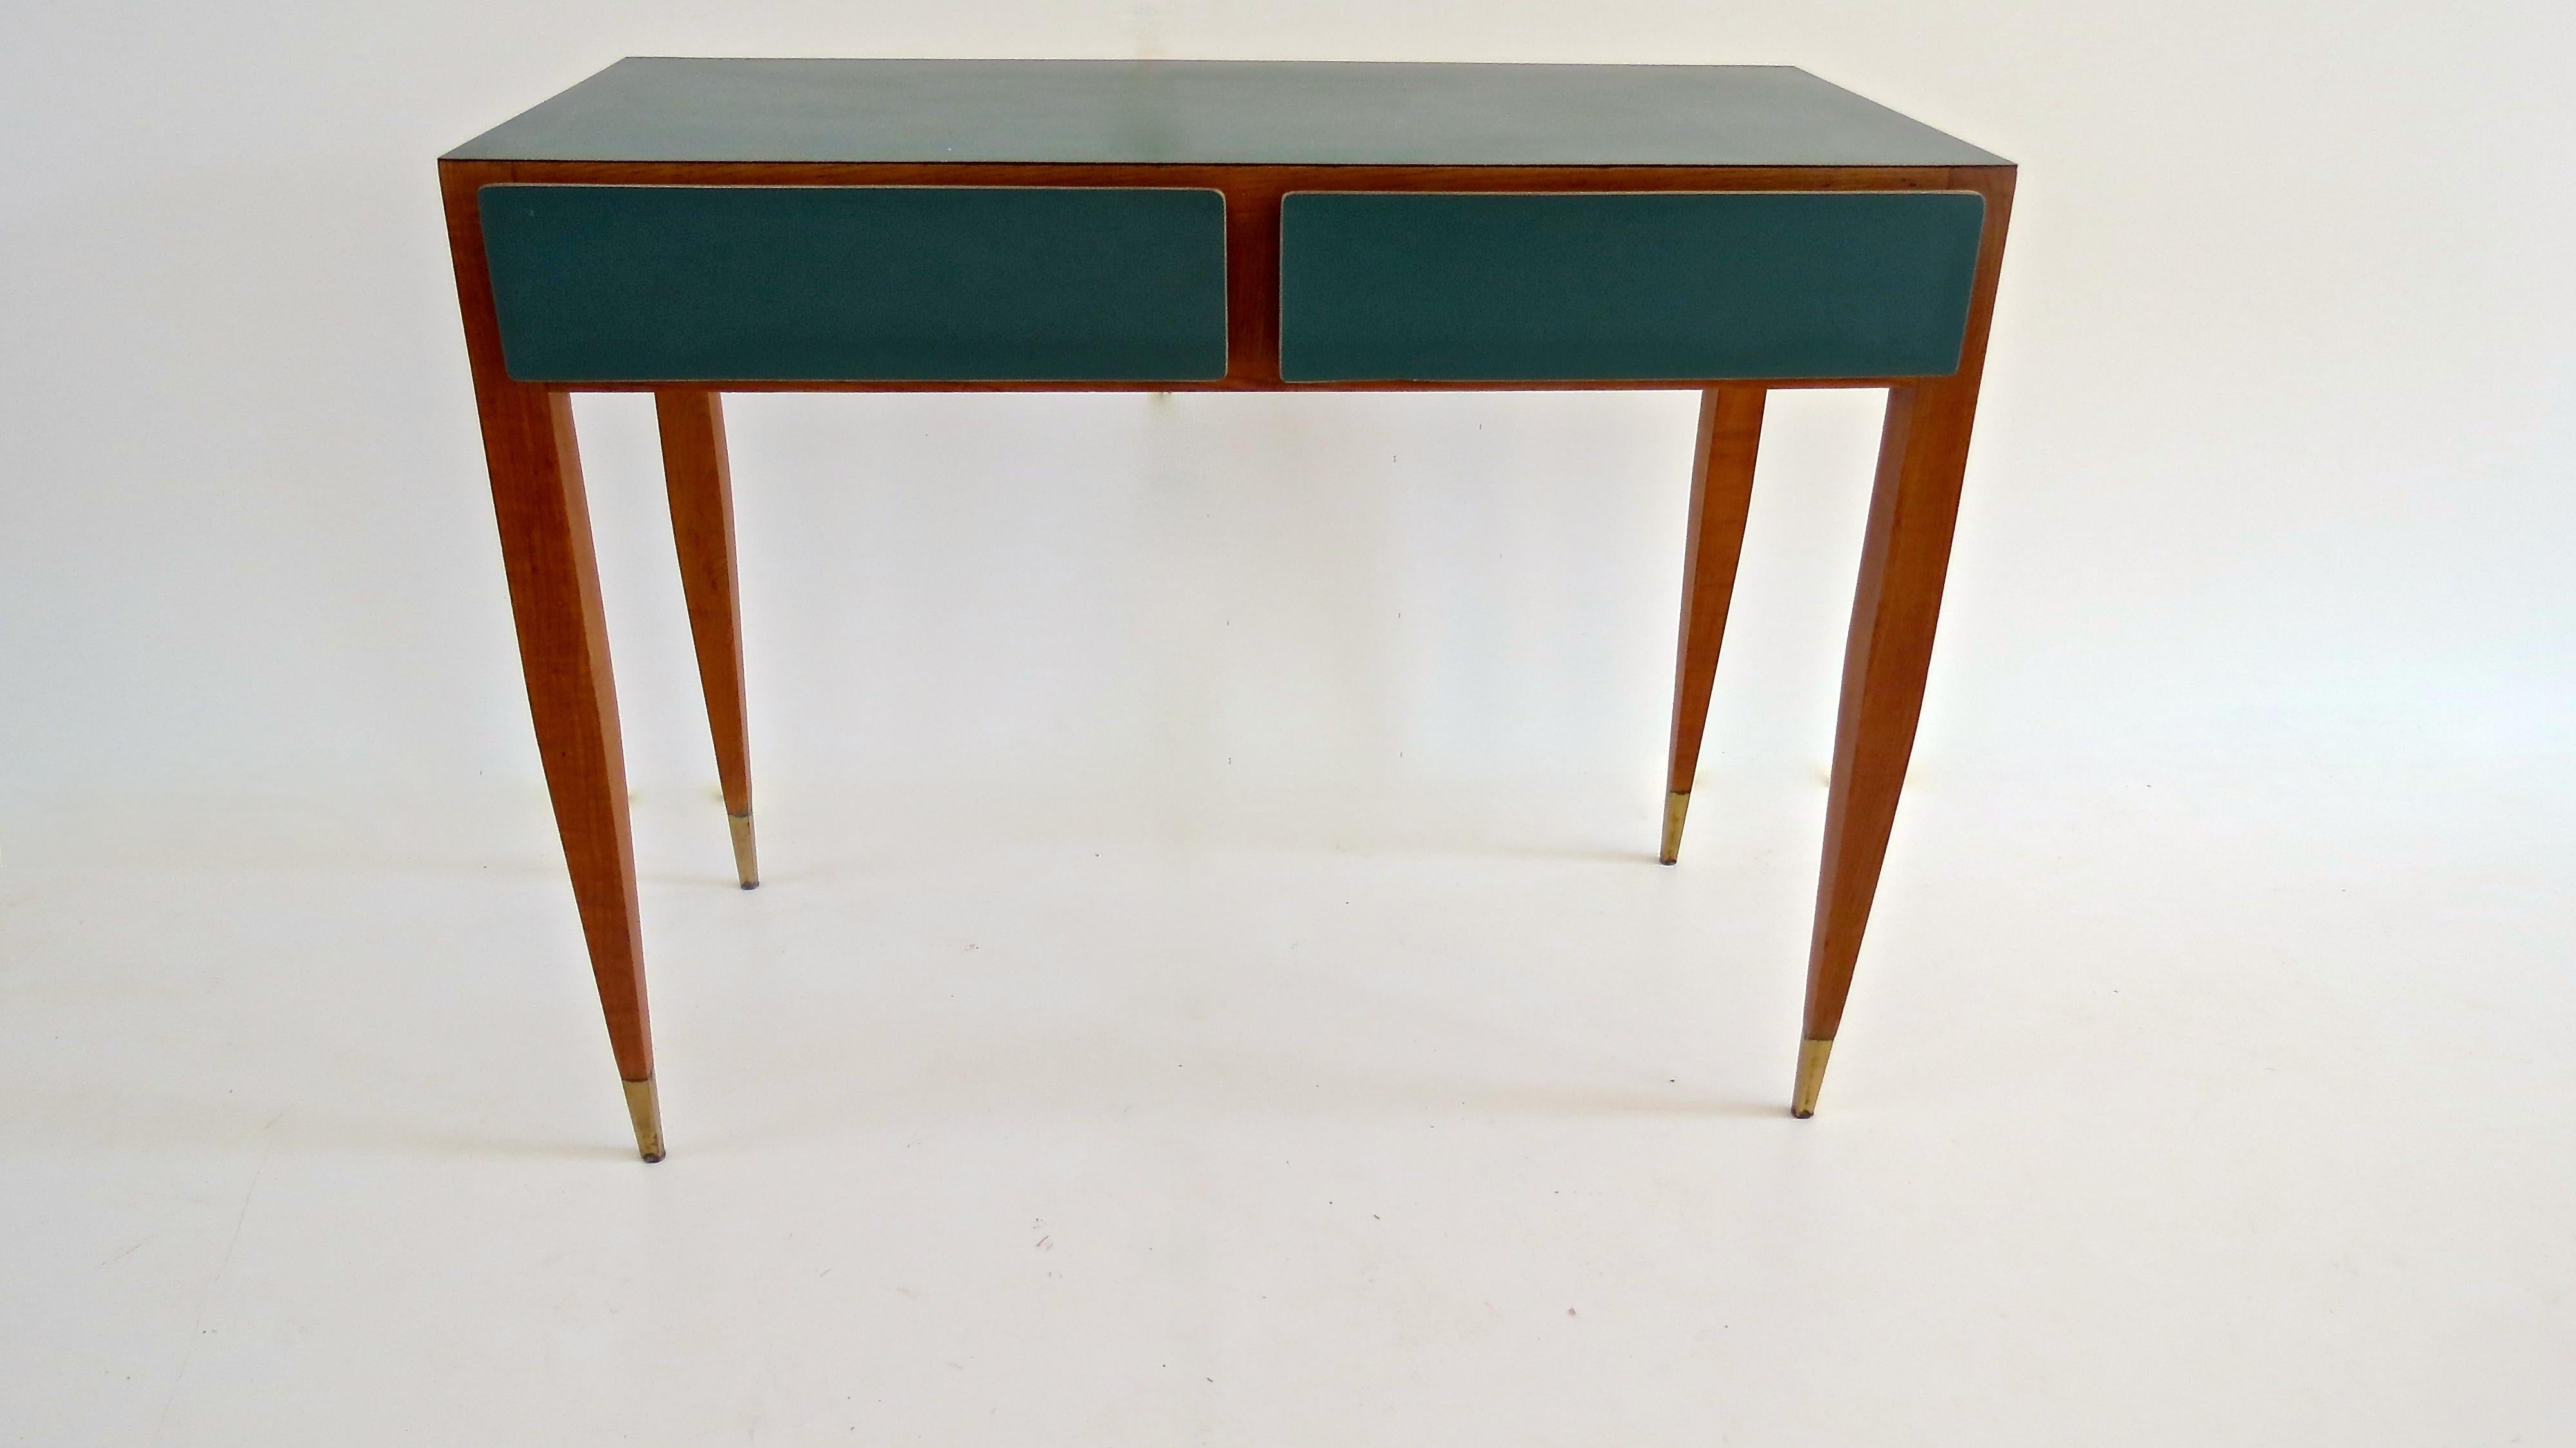 Rare vanity dressing table designed by Gio Ponti for the rooms of the Hotel Parco dei Principi in Roma
manufactured by Giordano Chiesa, 1964
two drawers
ash, laminate, nickel -plated brass- sold without the table mirror on top